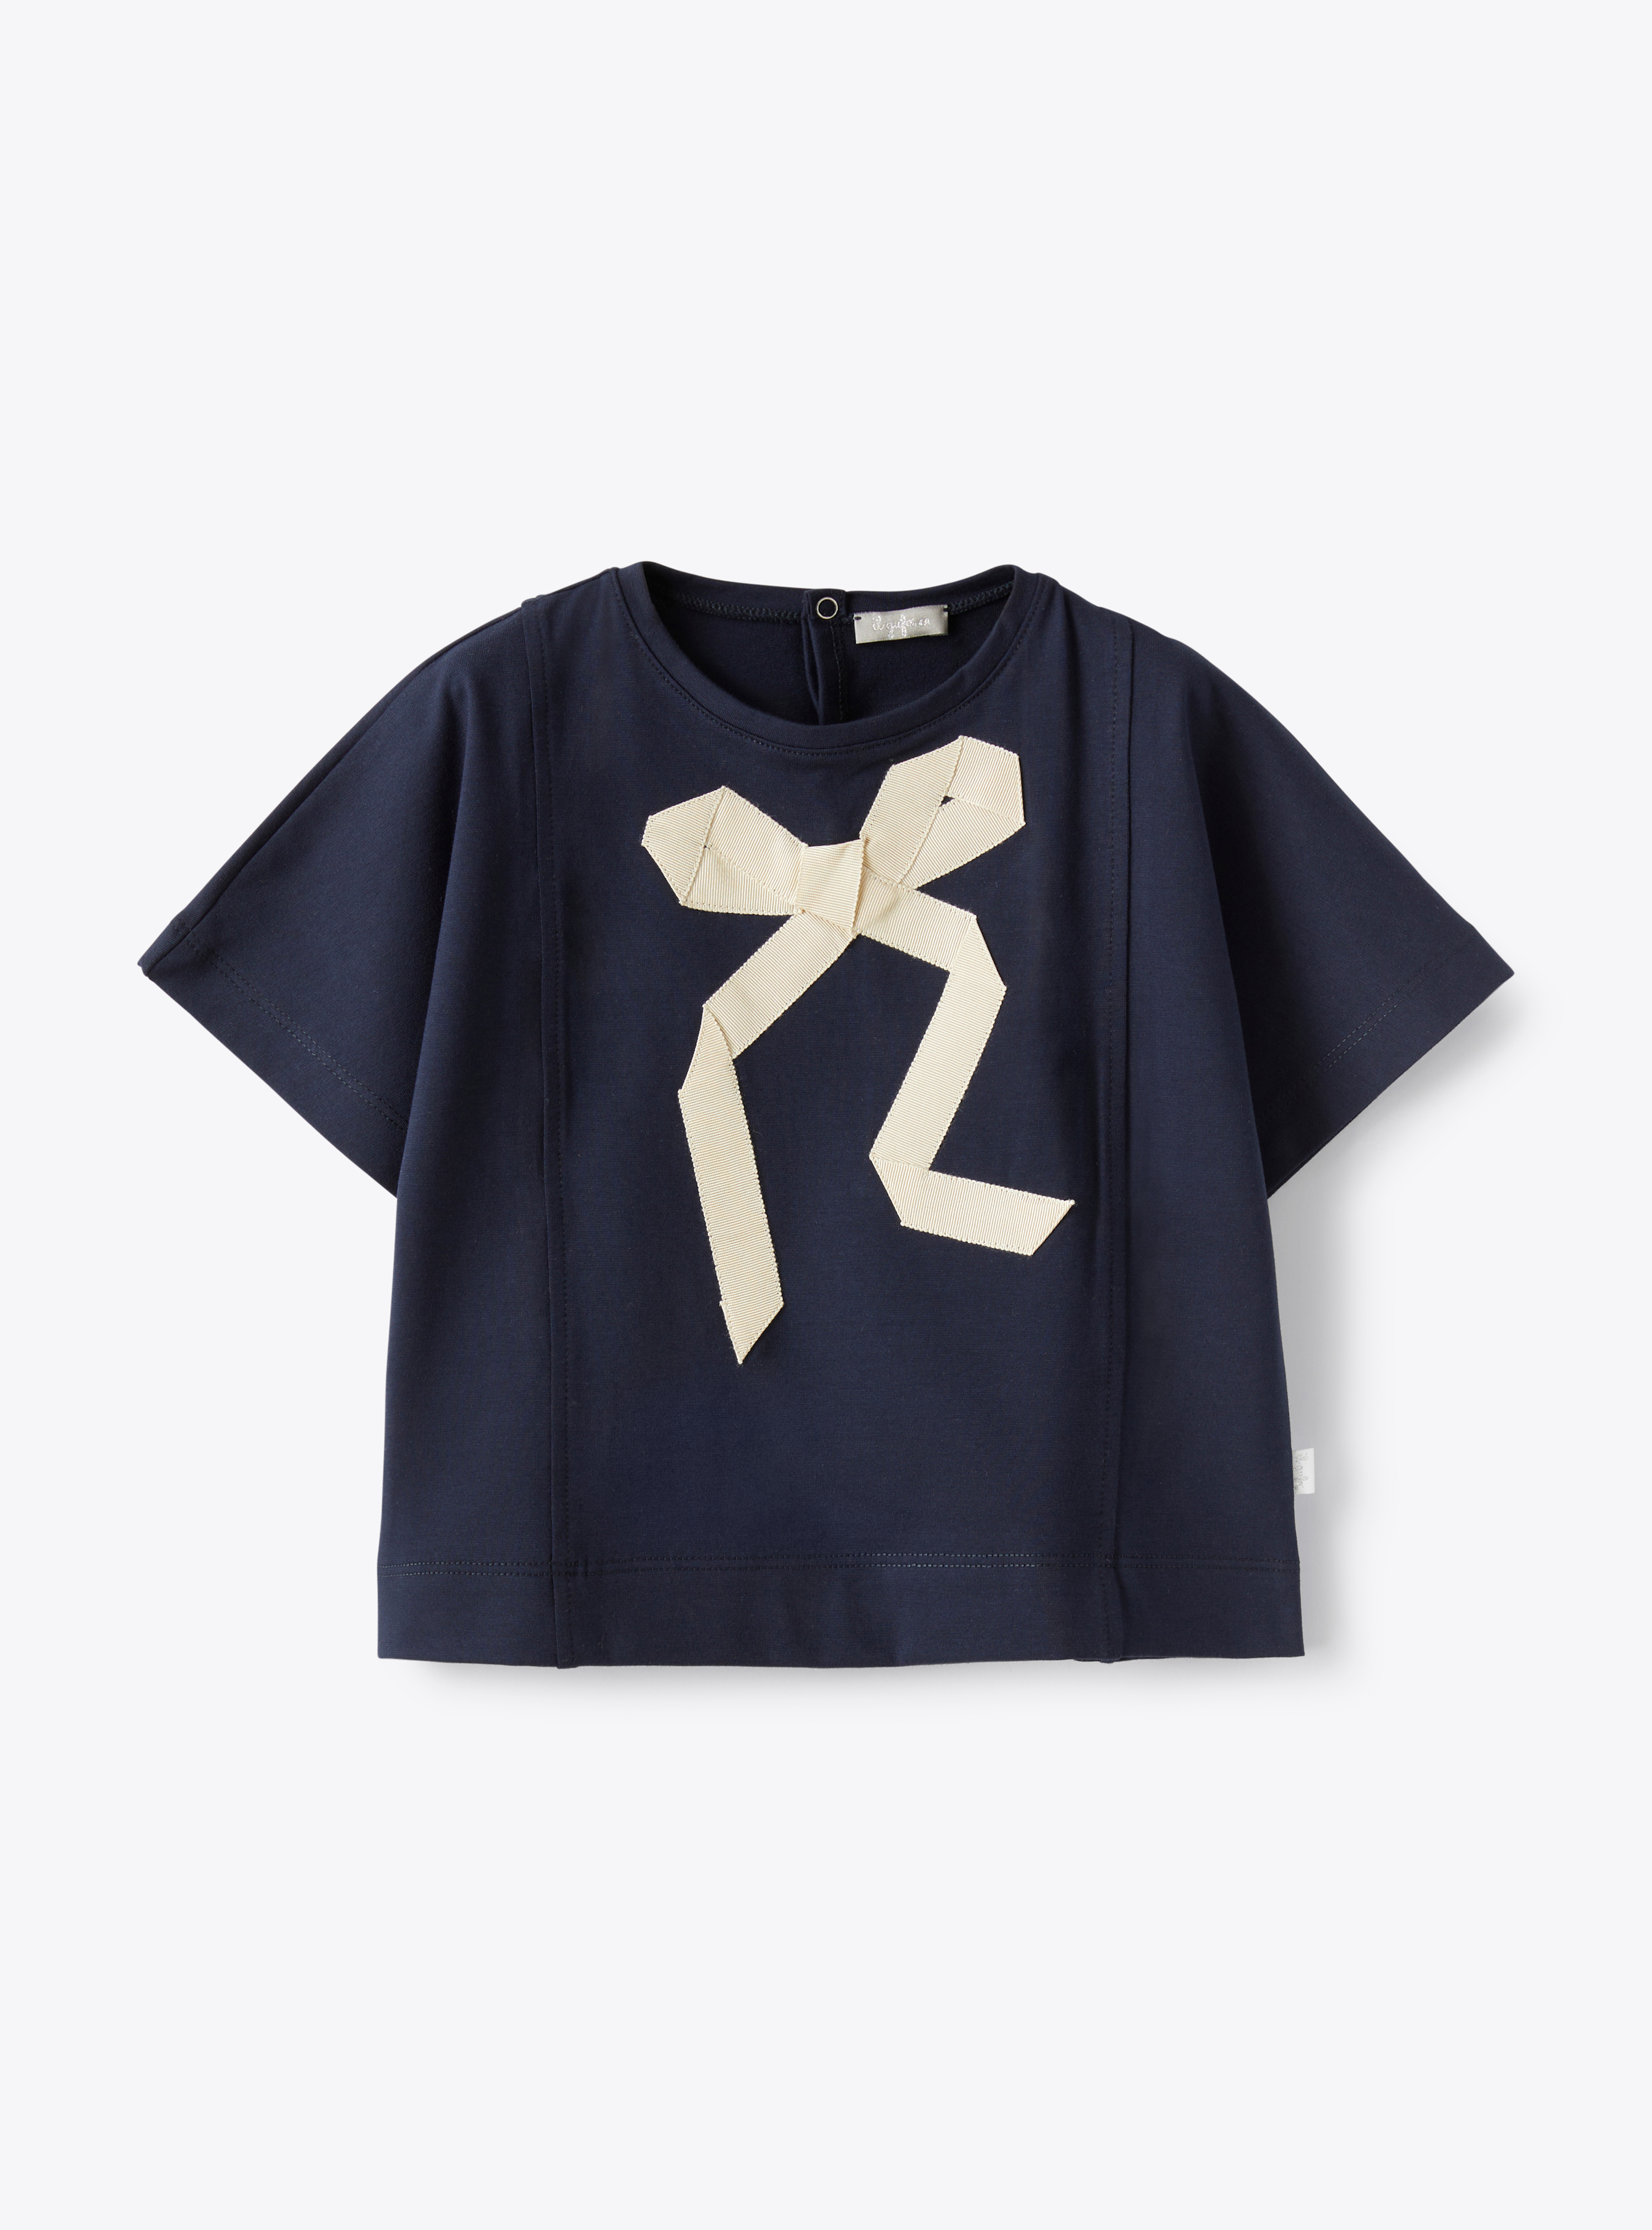 T-shirt with bow embellishment in beige - Blue | Il Gufo